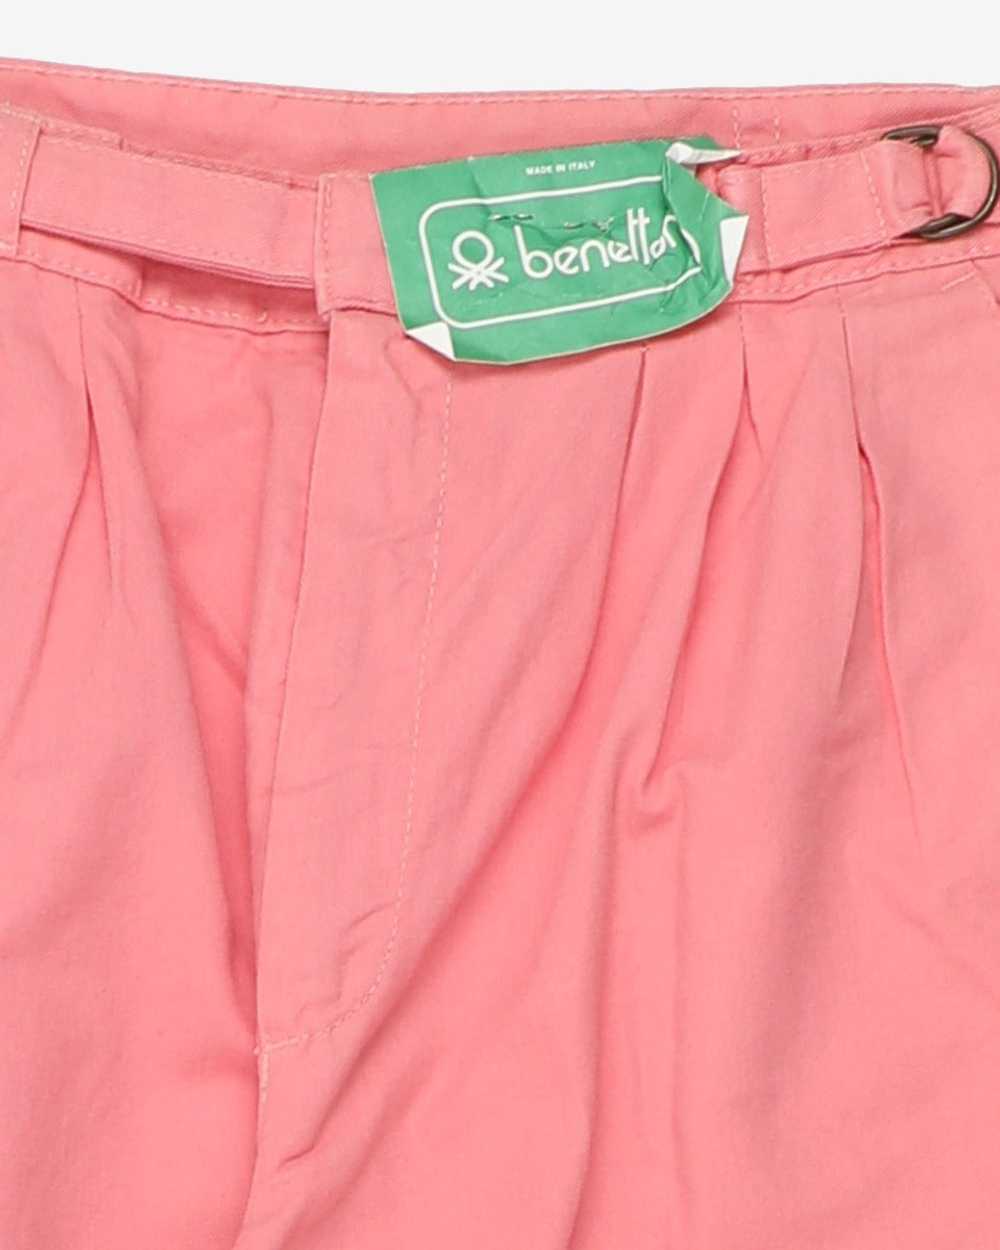 Benetton deadstock 1980's pleated high waisted tr… - image 9